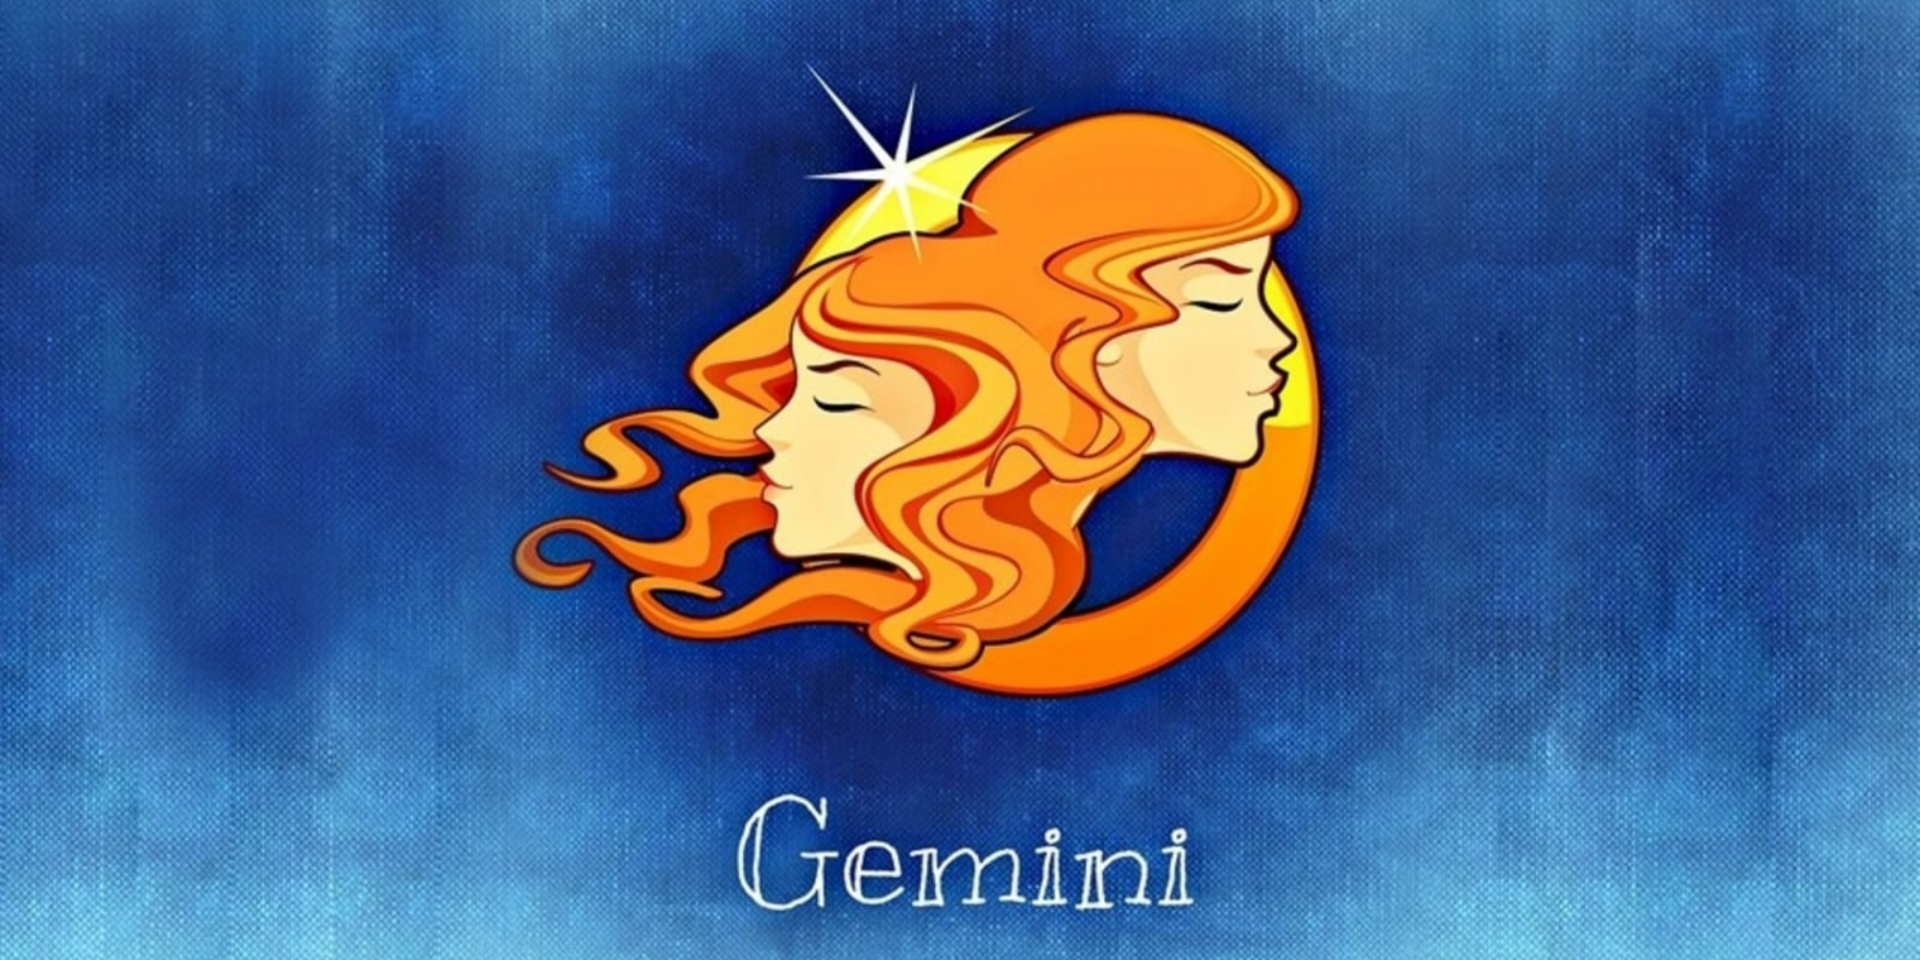 GEMINI Yearly Horoscope 2022 - Astrological Prediction for Love, Career, Money and Health